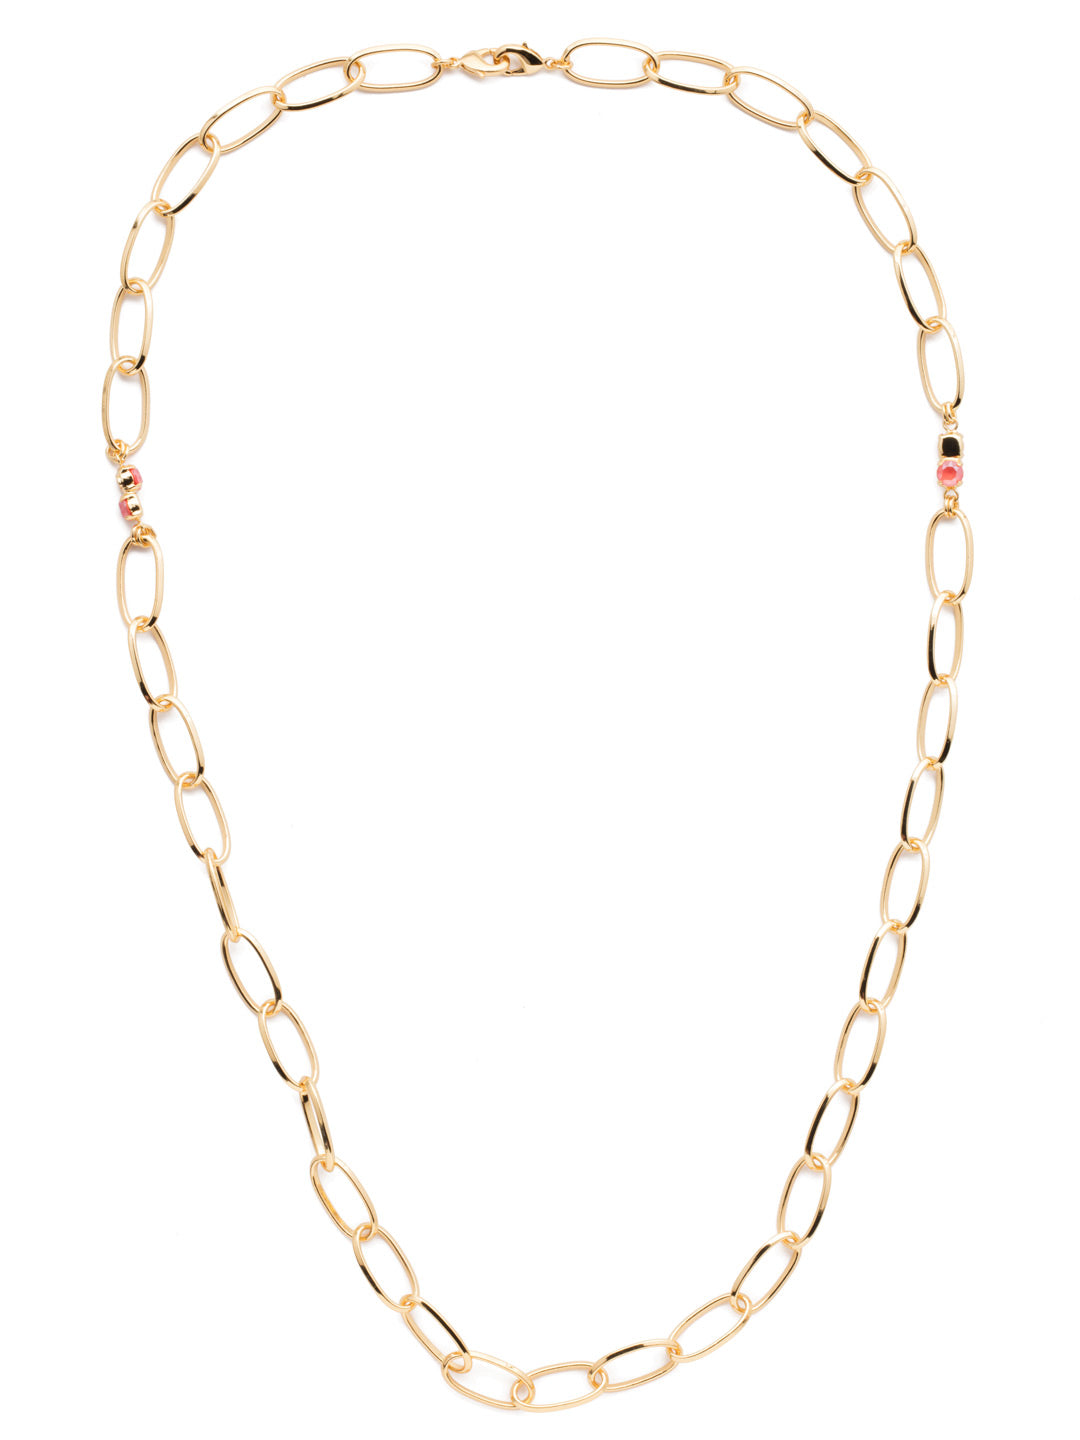 Tamara Long Necklace - NEP32BGBGA - <p>A metal link chain attaches perfectly to your face covering with double lobster claws on each end. Also can be worn as a necklace for some extra layering. From Sorrelli's Begonia collection in our Bright Gold-tone finish.</p>